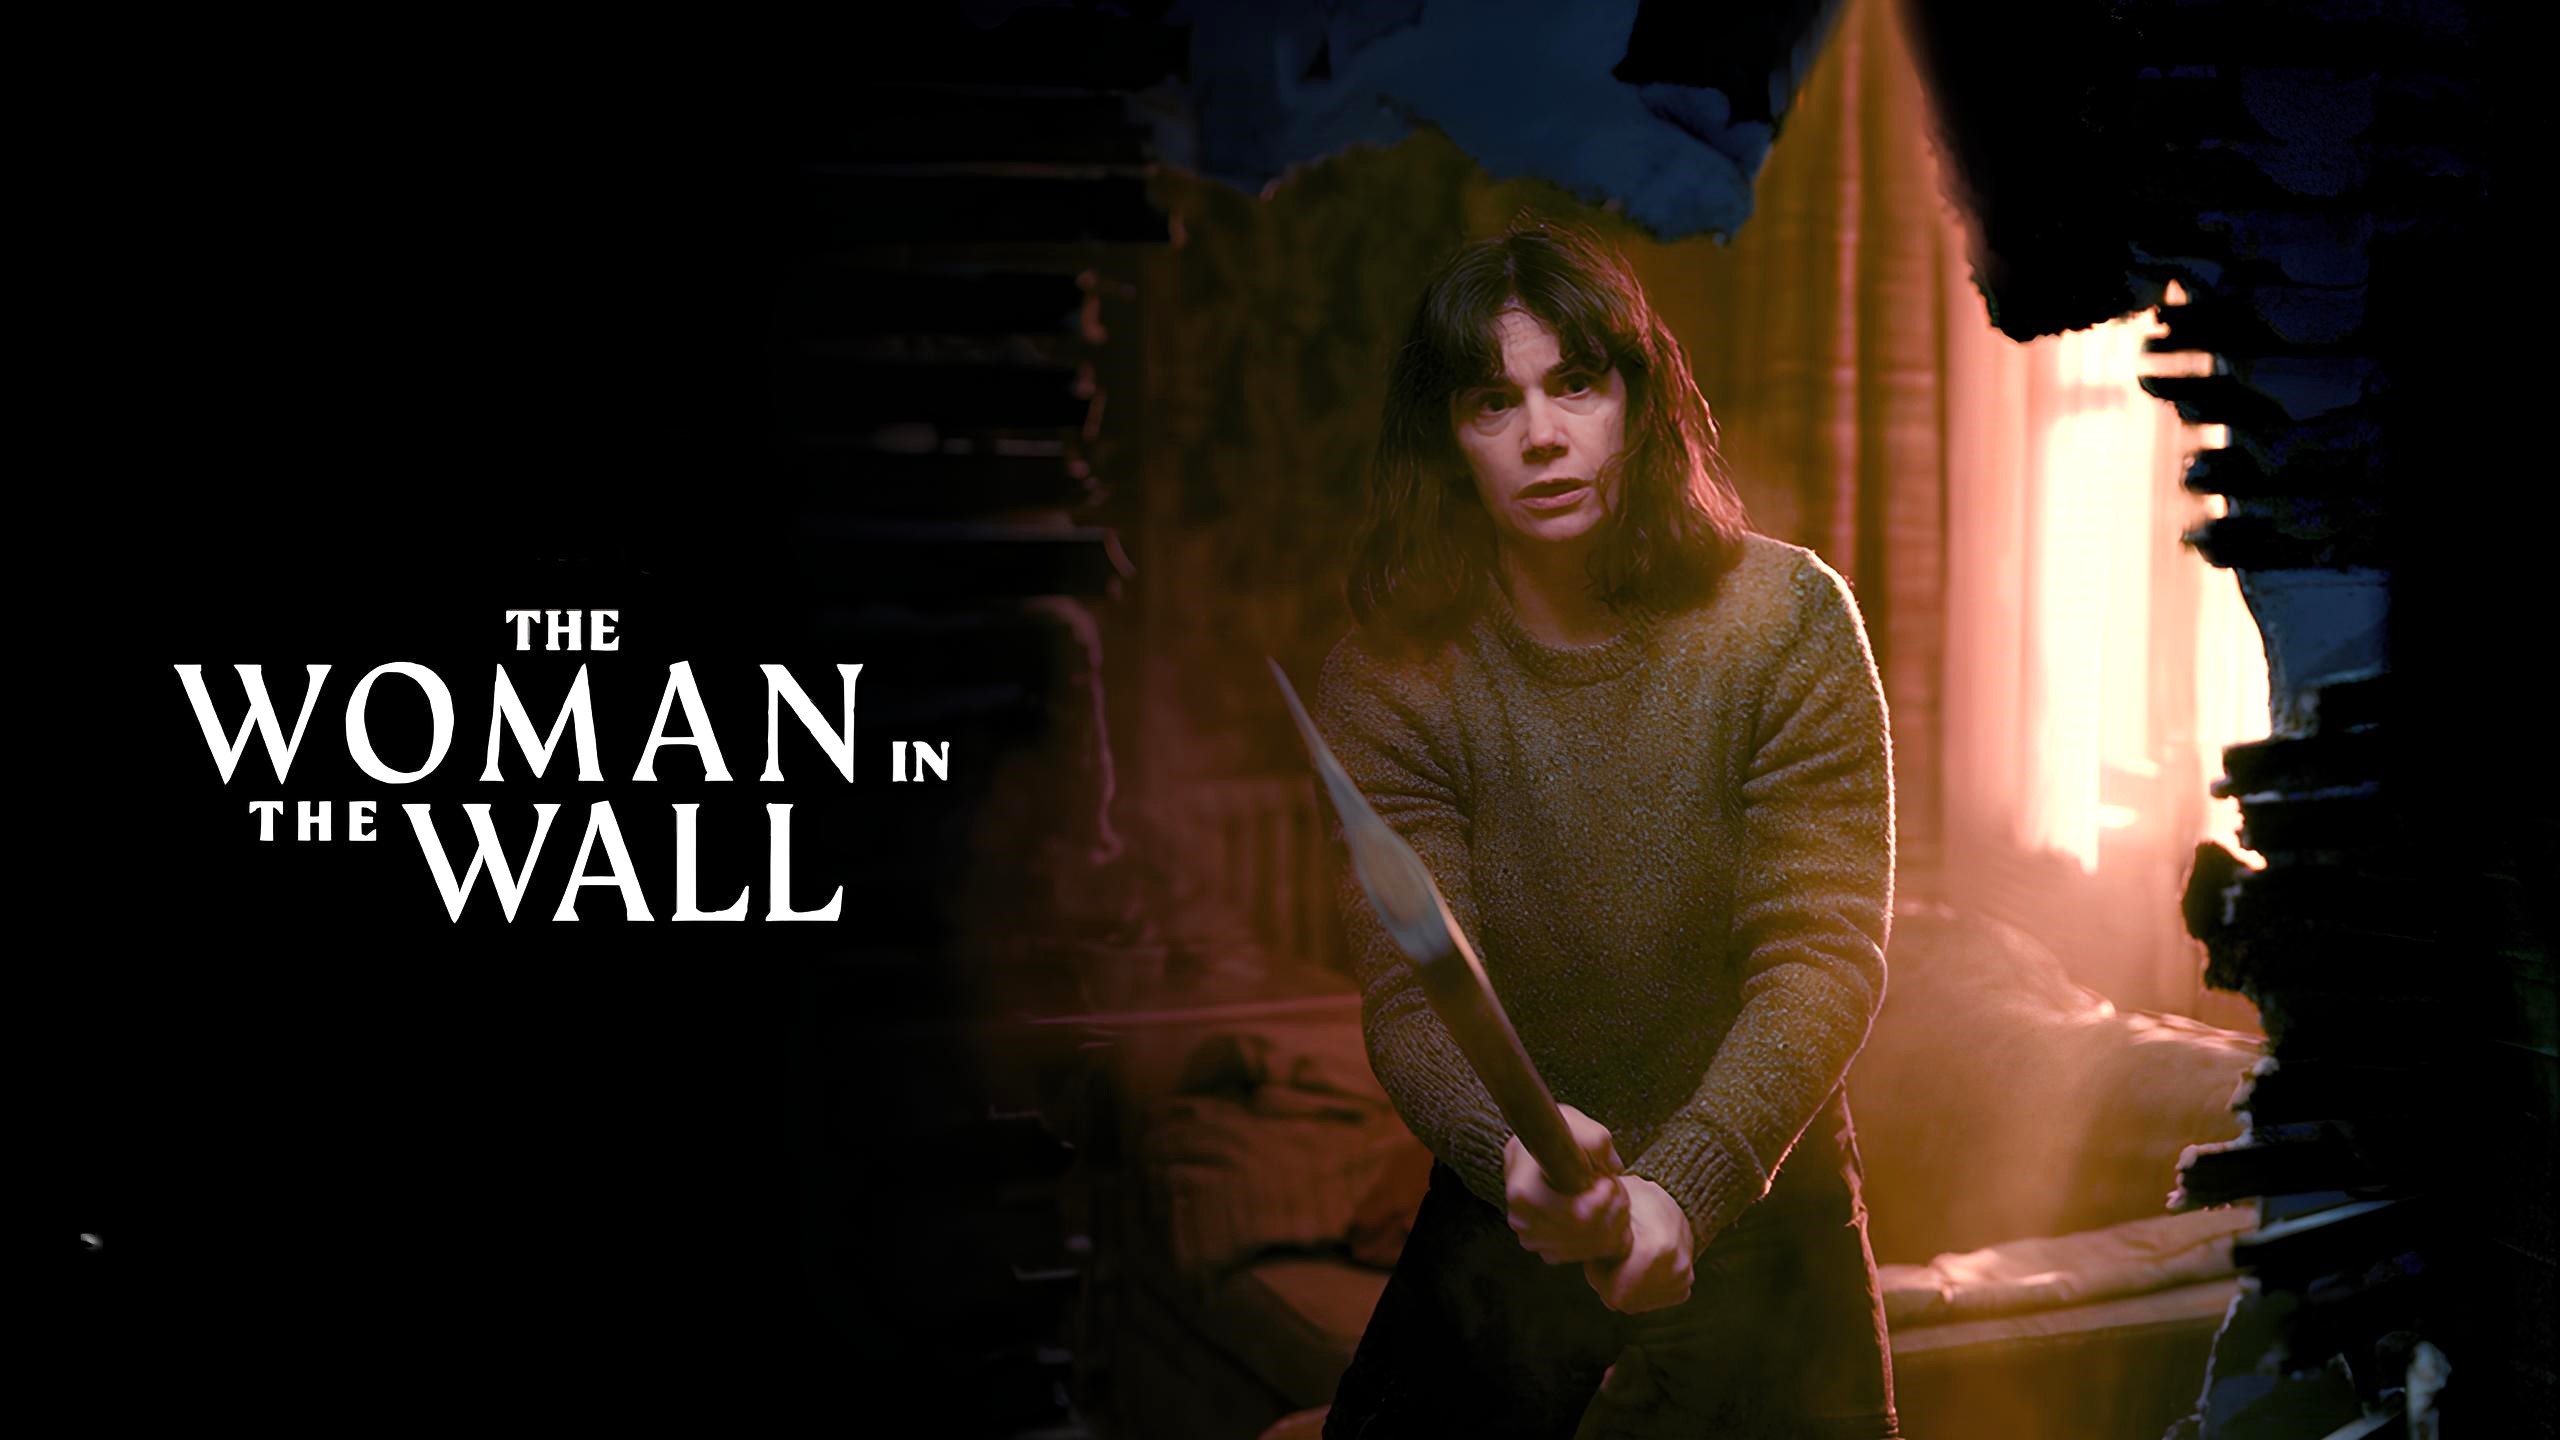 The Woman in the Wall Season 2 release date